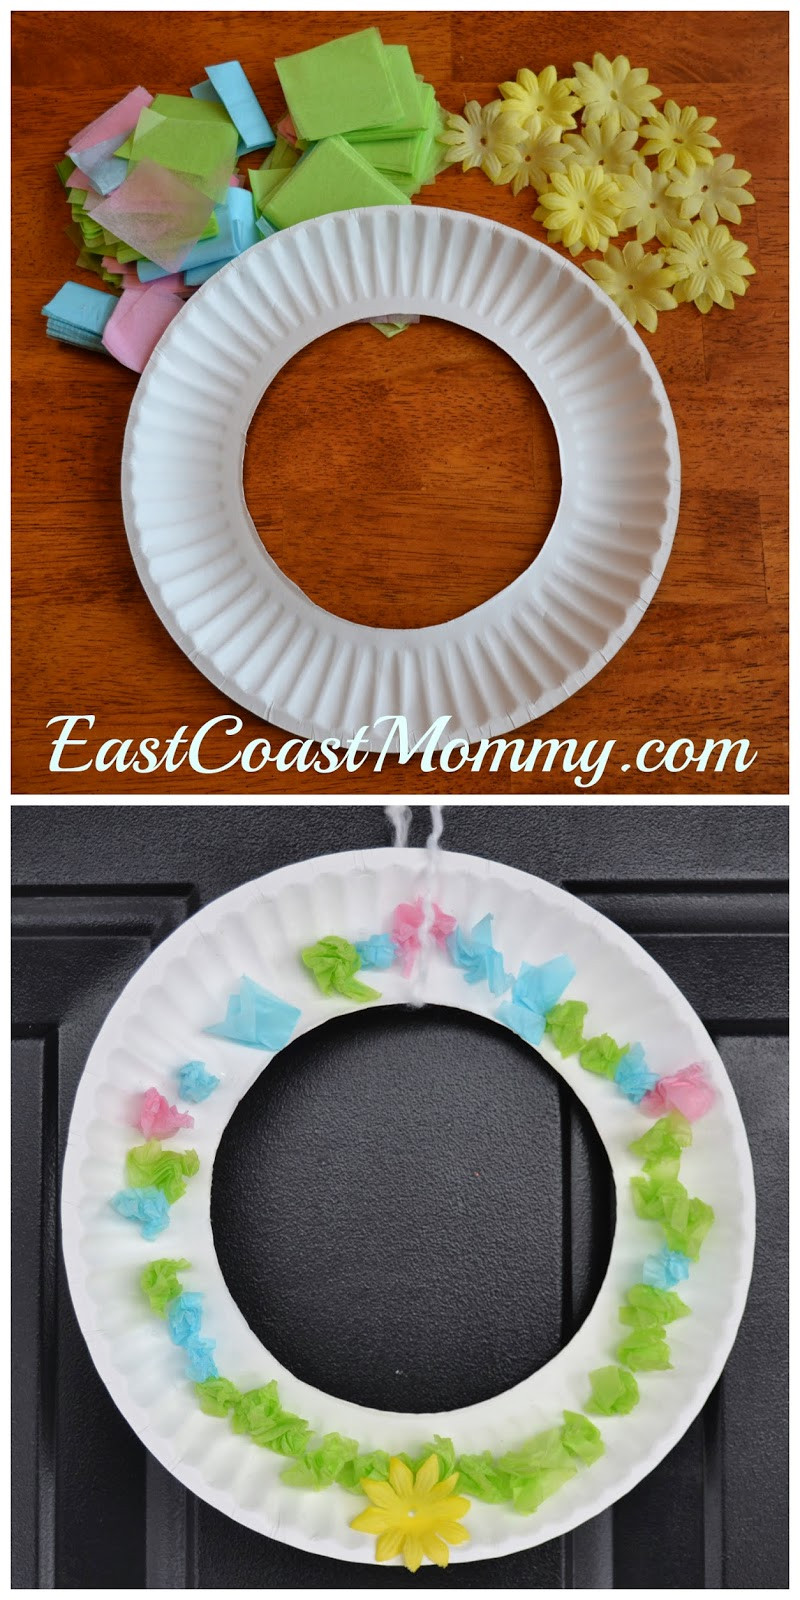 Easy Spring Crafts For Toddlers
 East Coast Mommy Spring Craft for Preschoolers